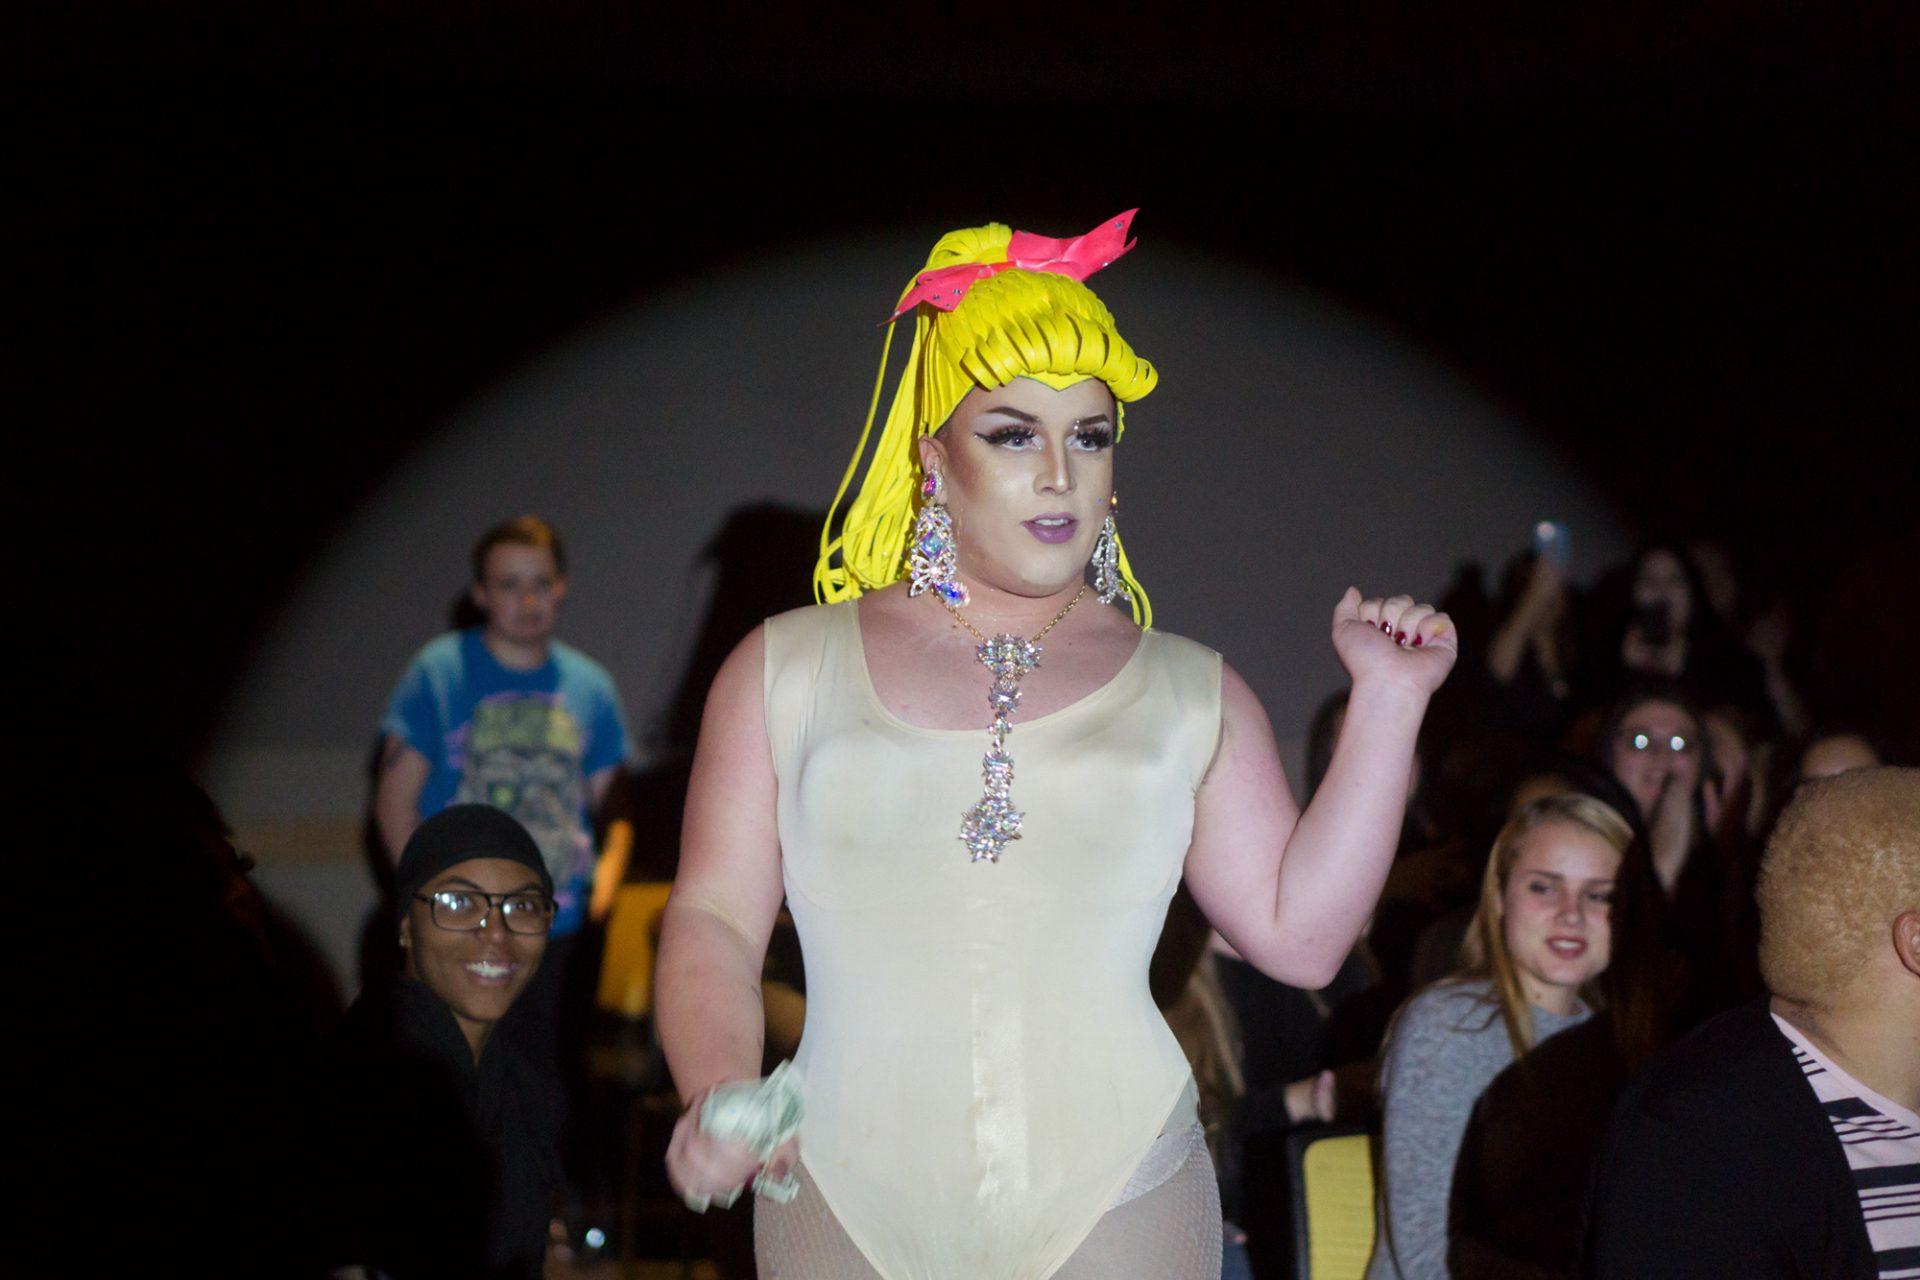 Kay Tu Russo performing at the Professional Drag show on Saturday night in the student union. When not in drag, Kolby Usrey enjoys spending time with his boyfriend and kids. 